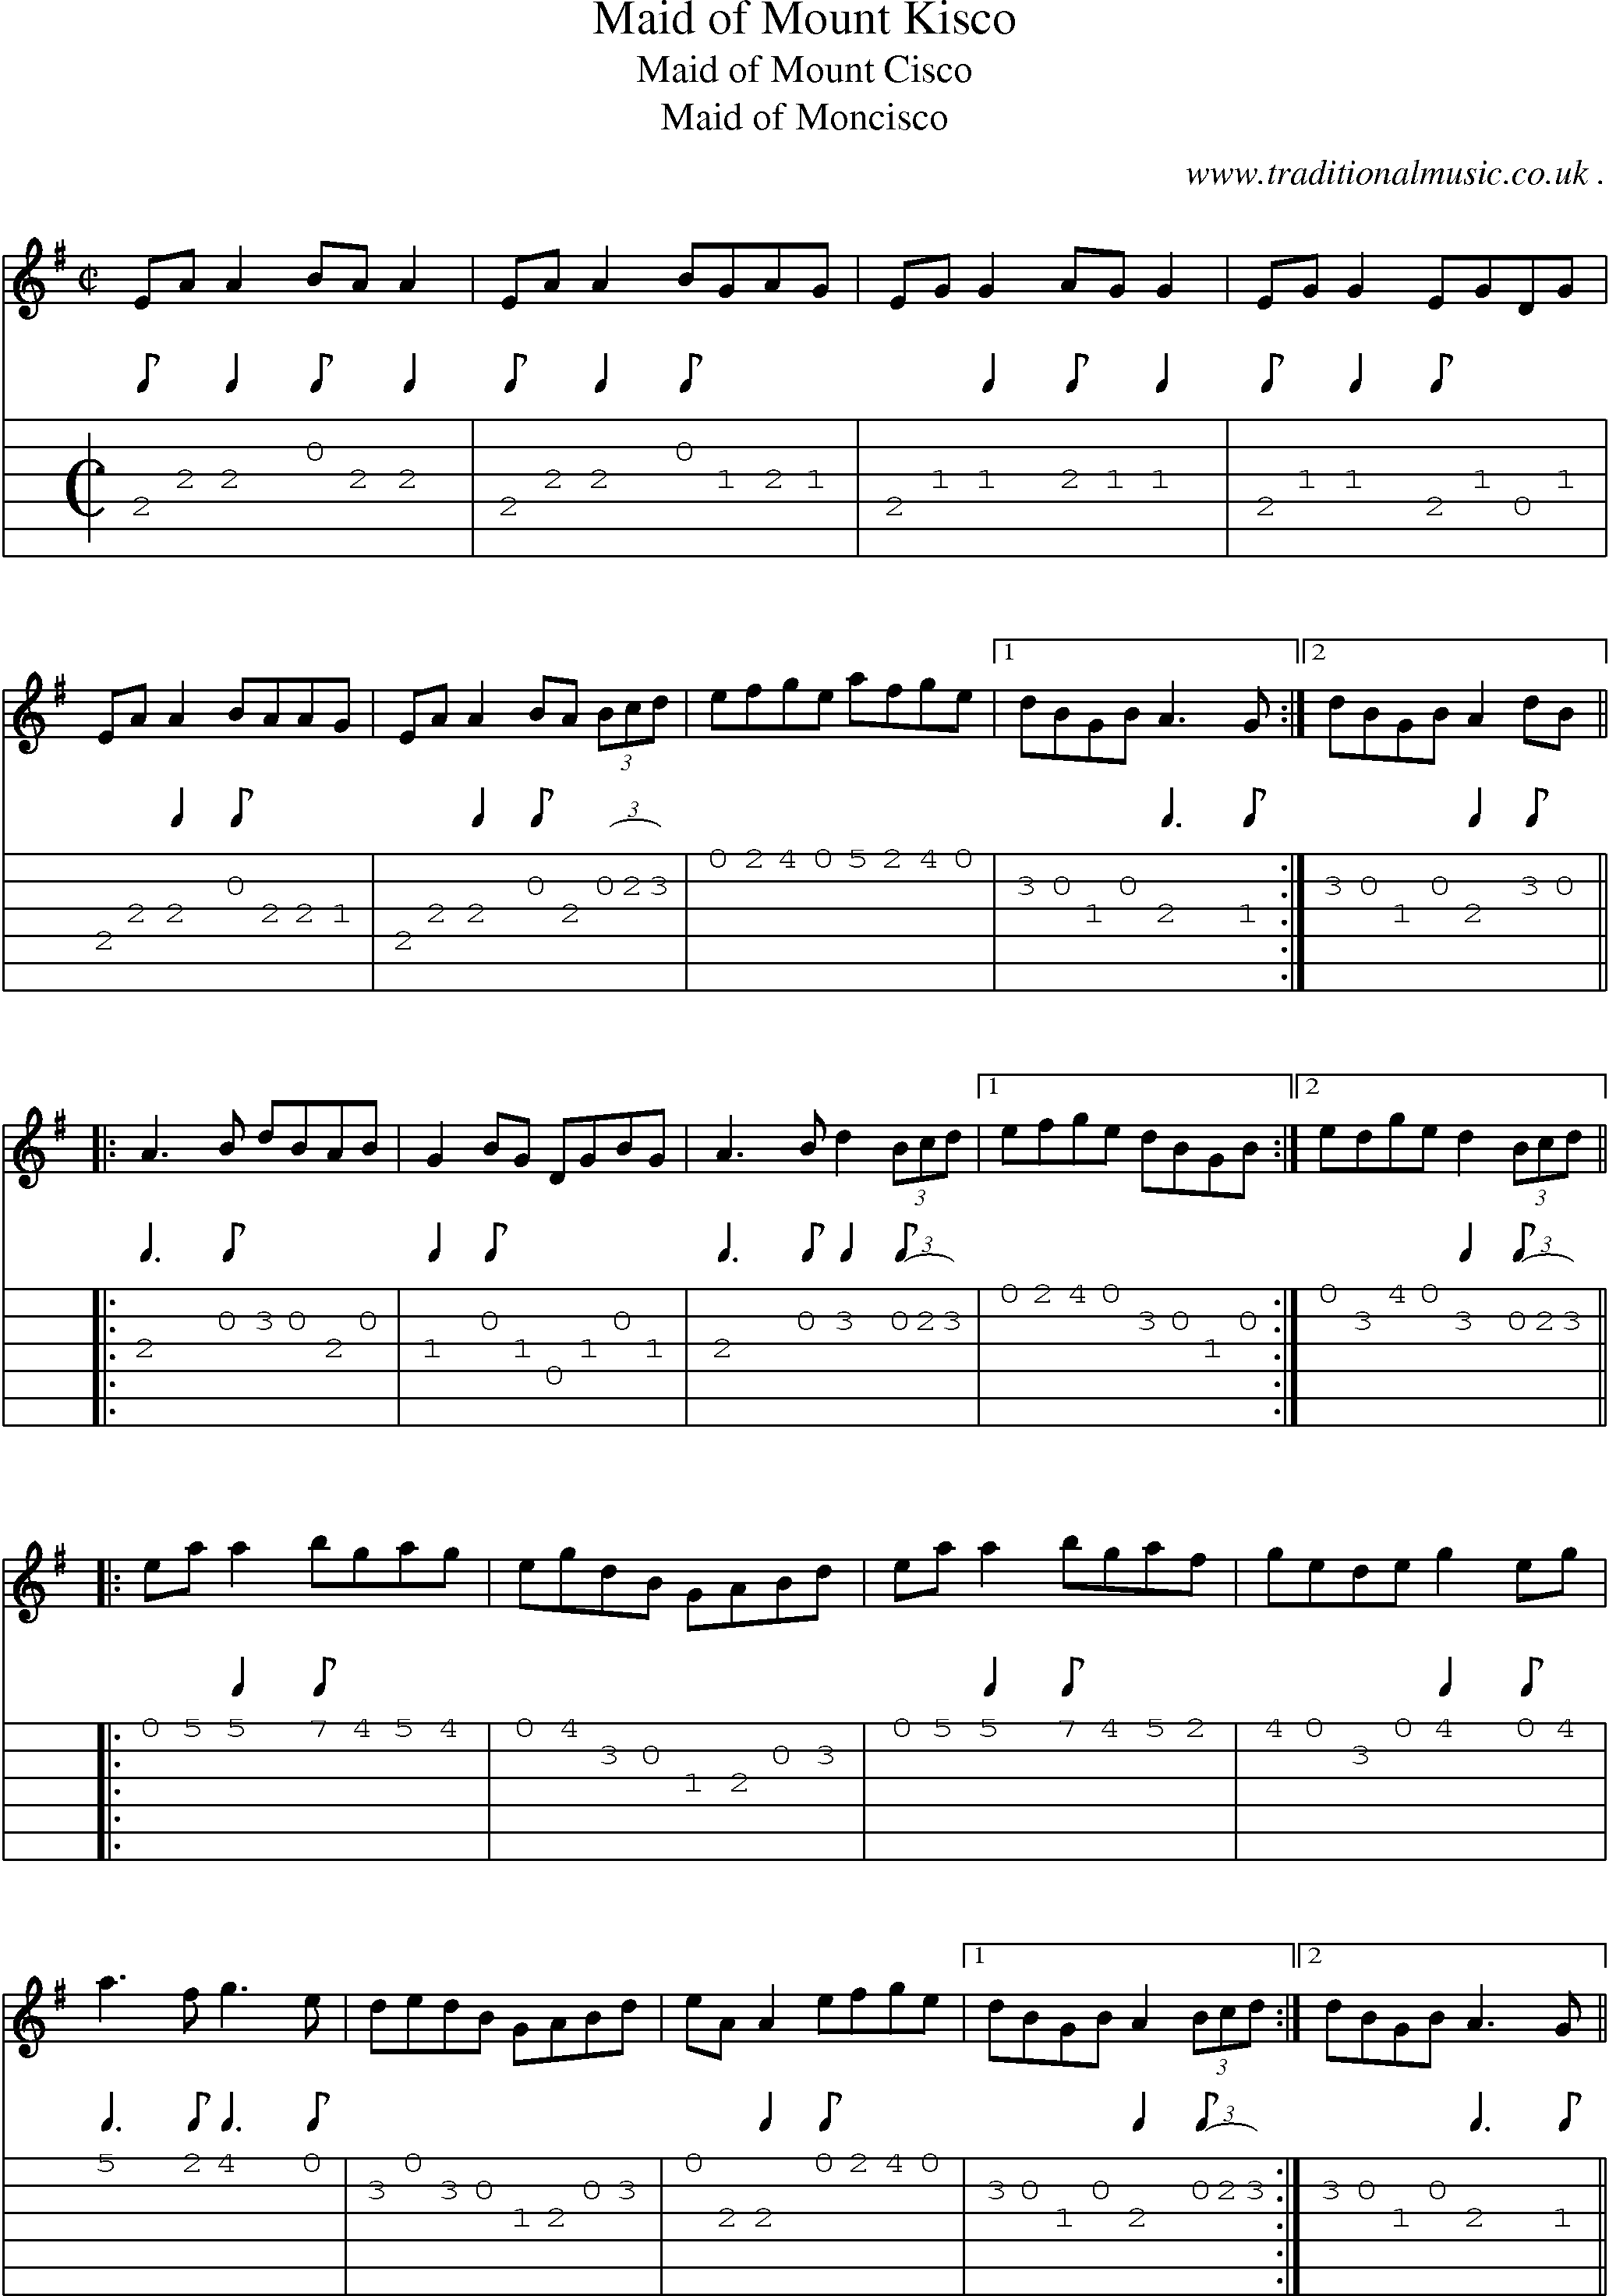 Sheet-Music and Guitar Tabs for Maid Of Mount Kisco